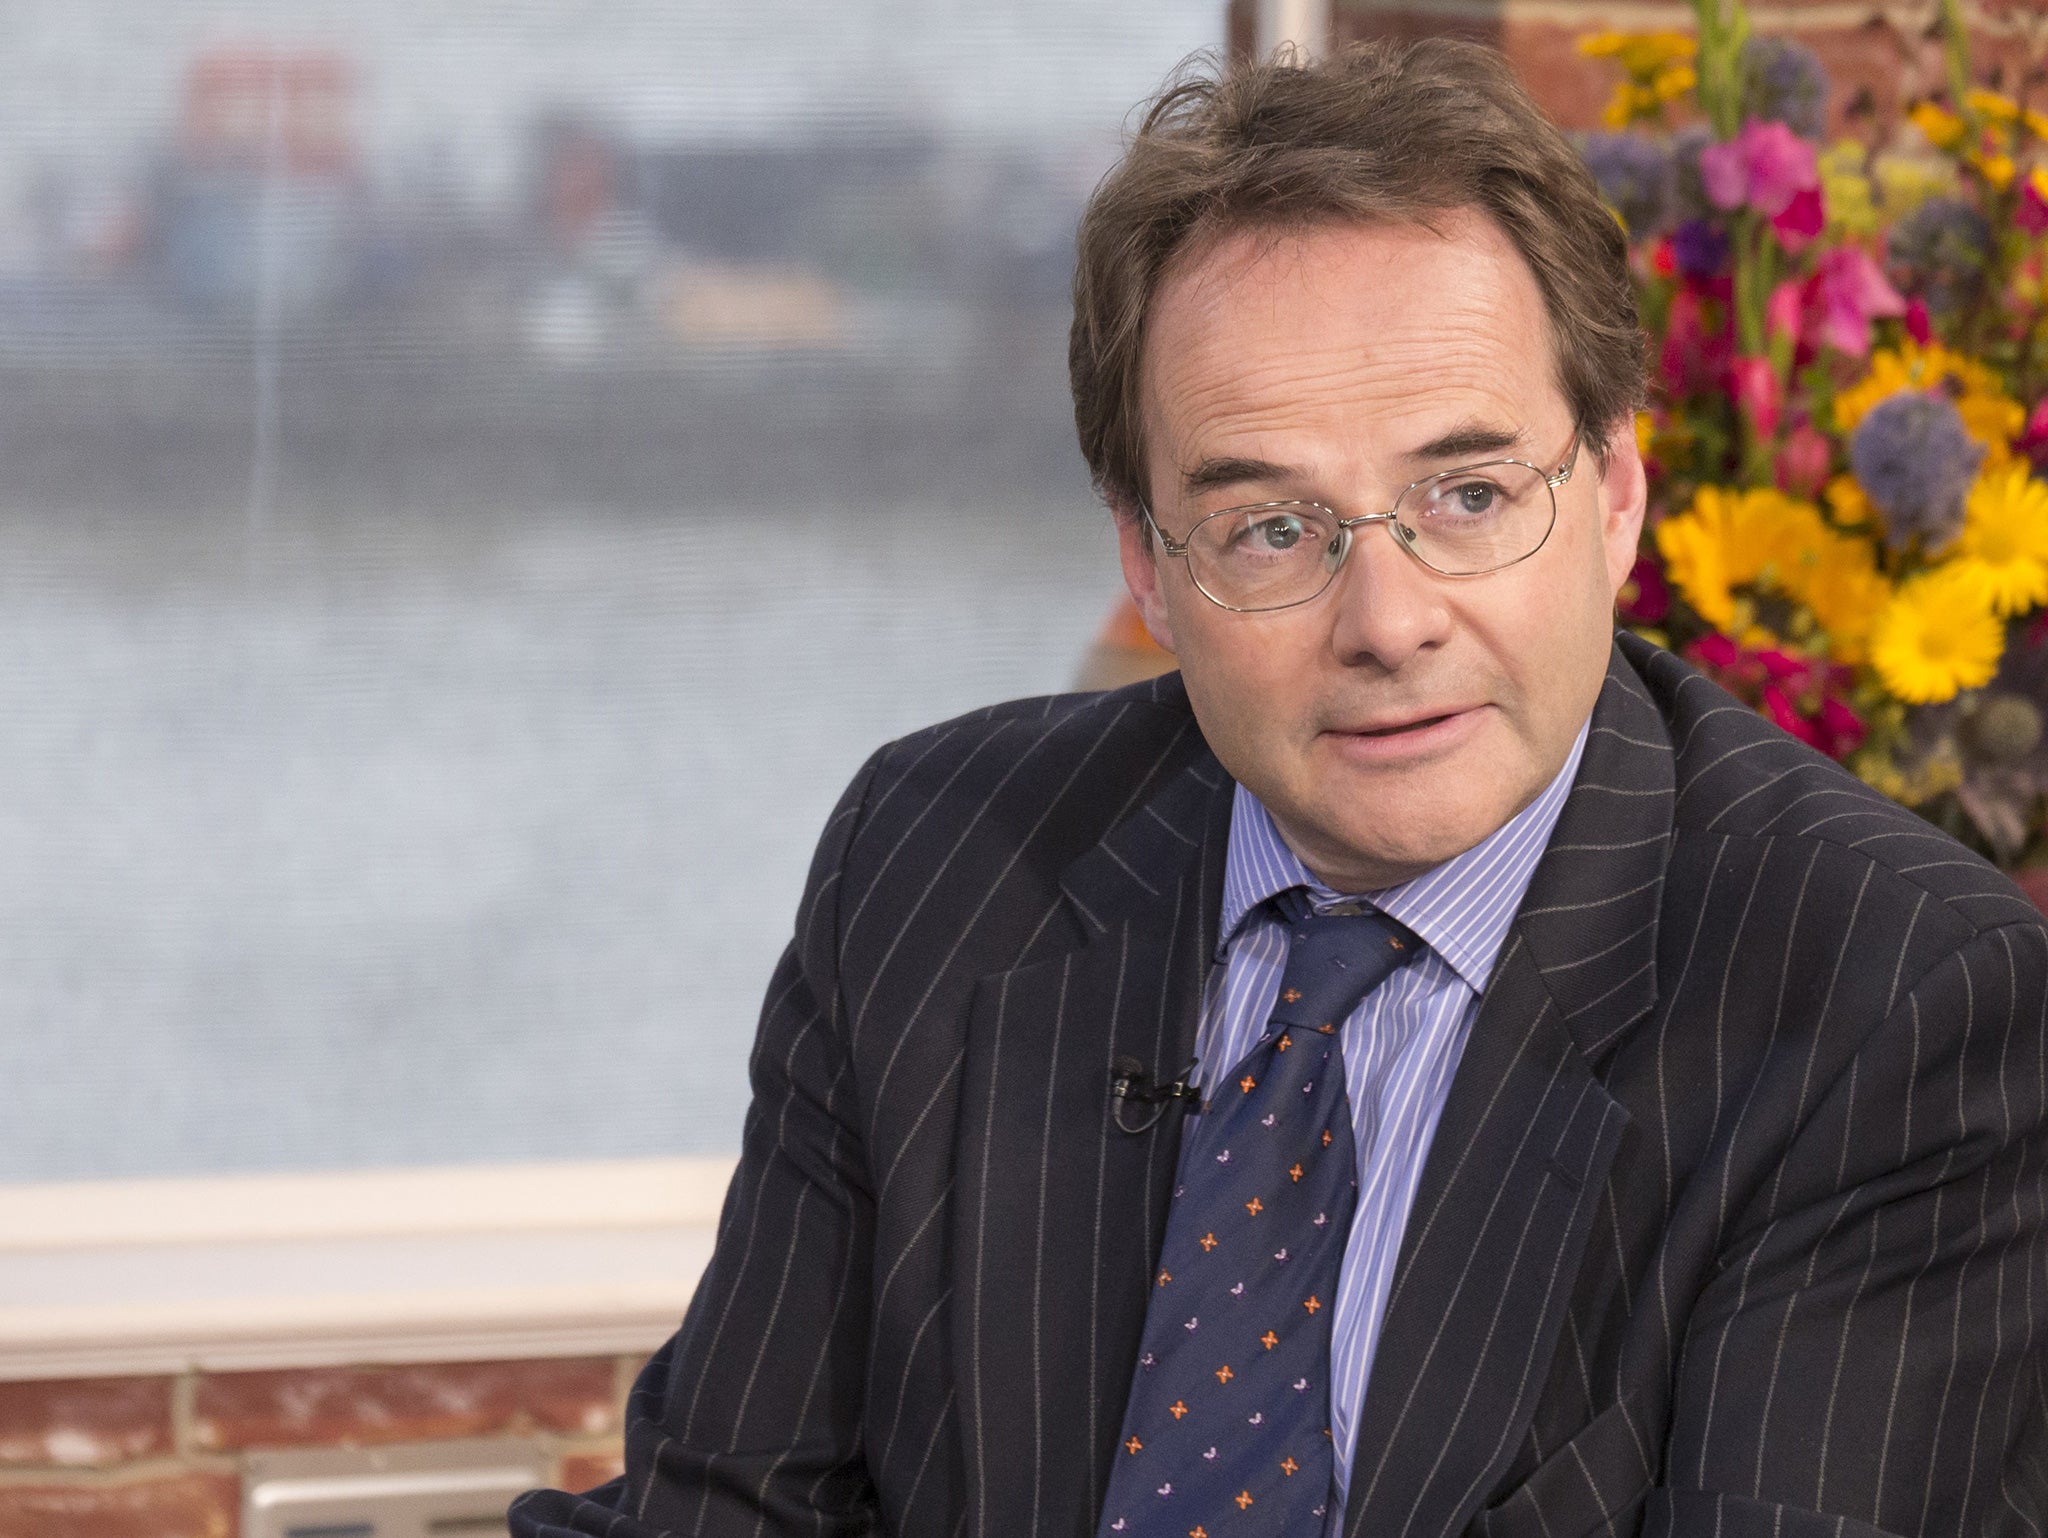 Daily Mail journalist Quentin Letts